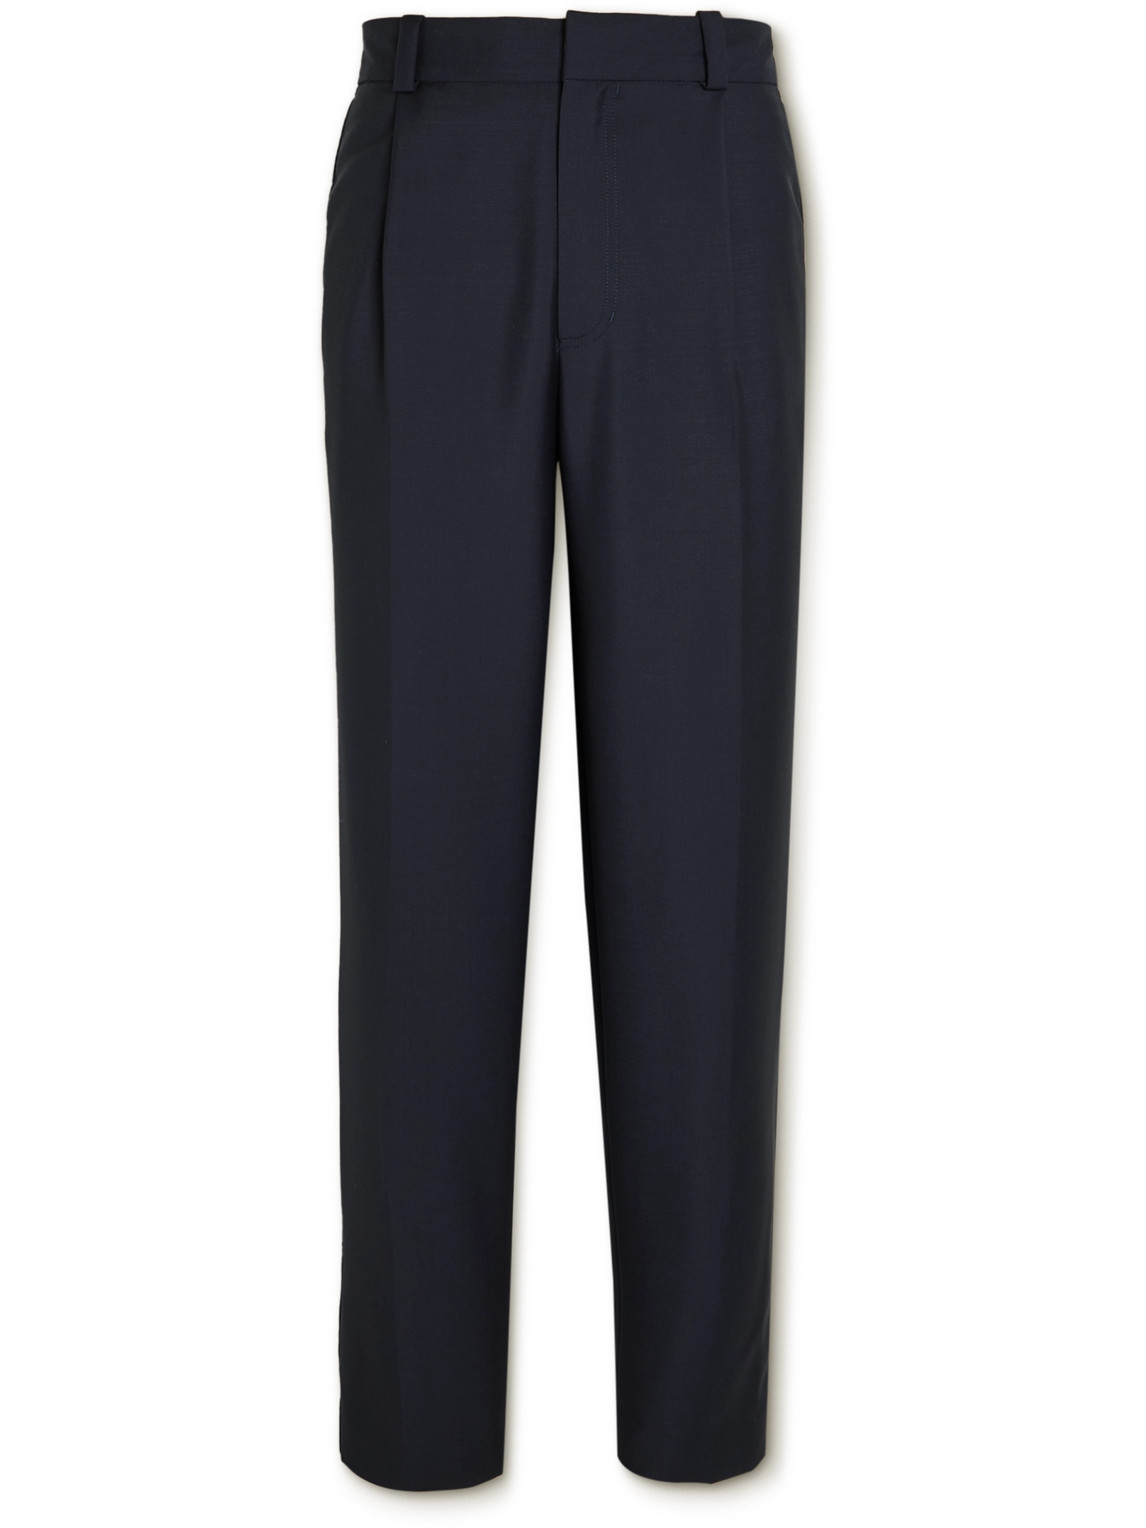 Acne Studios Wool and Mohair-Blend Trousers